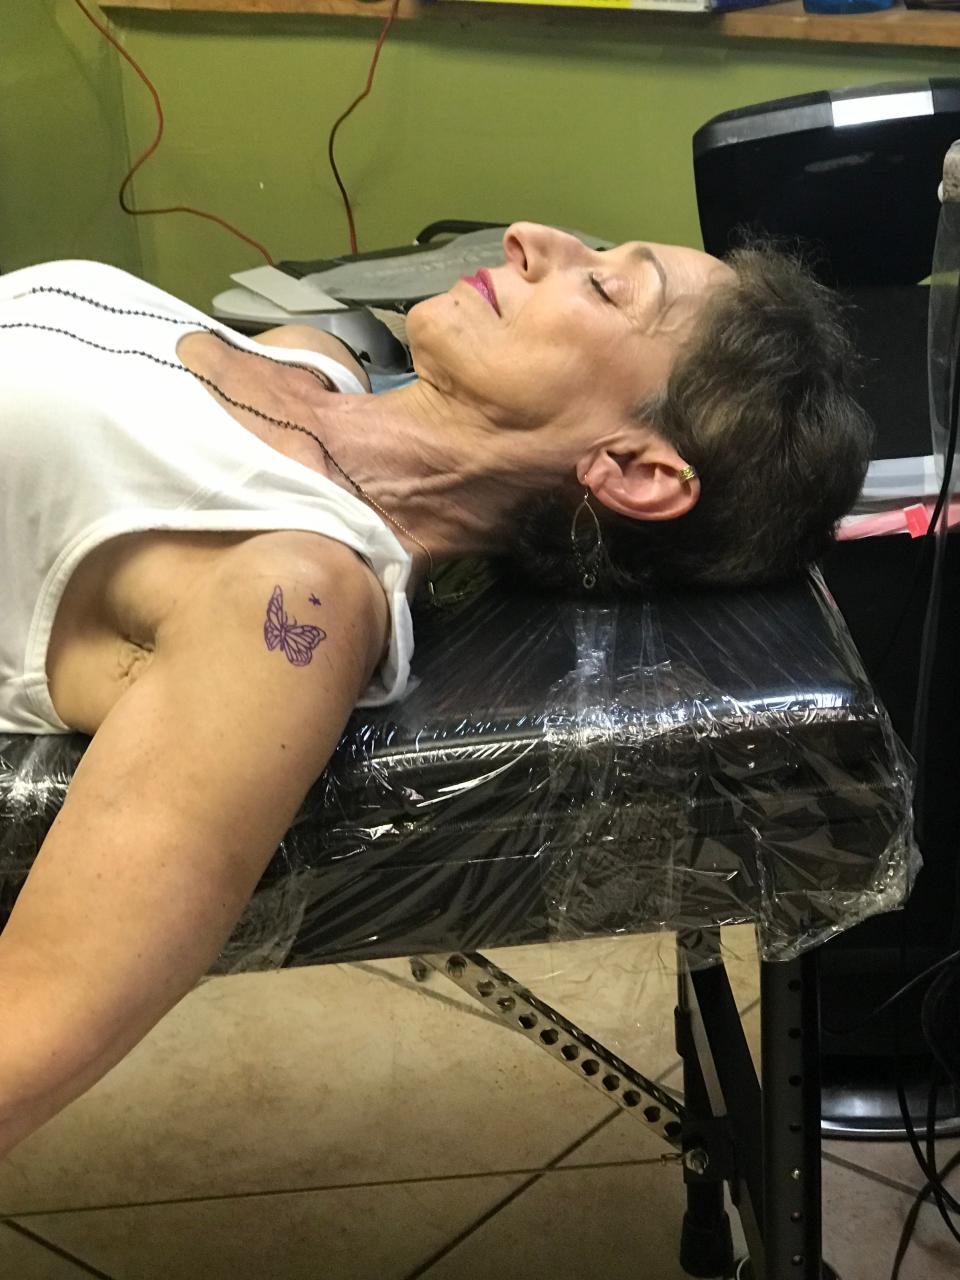 The author in a tattoo shop lying down on a tattooing bench with a stencil of a butterfly tattoo her upper arm waiting to be tattooed